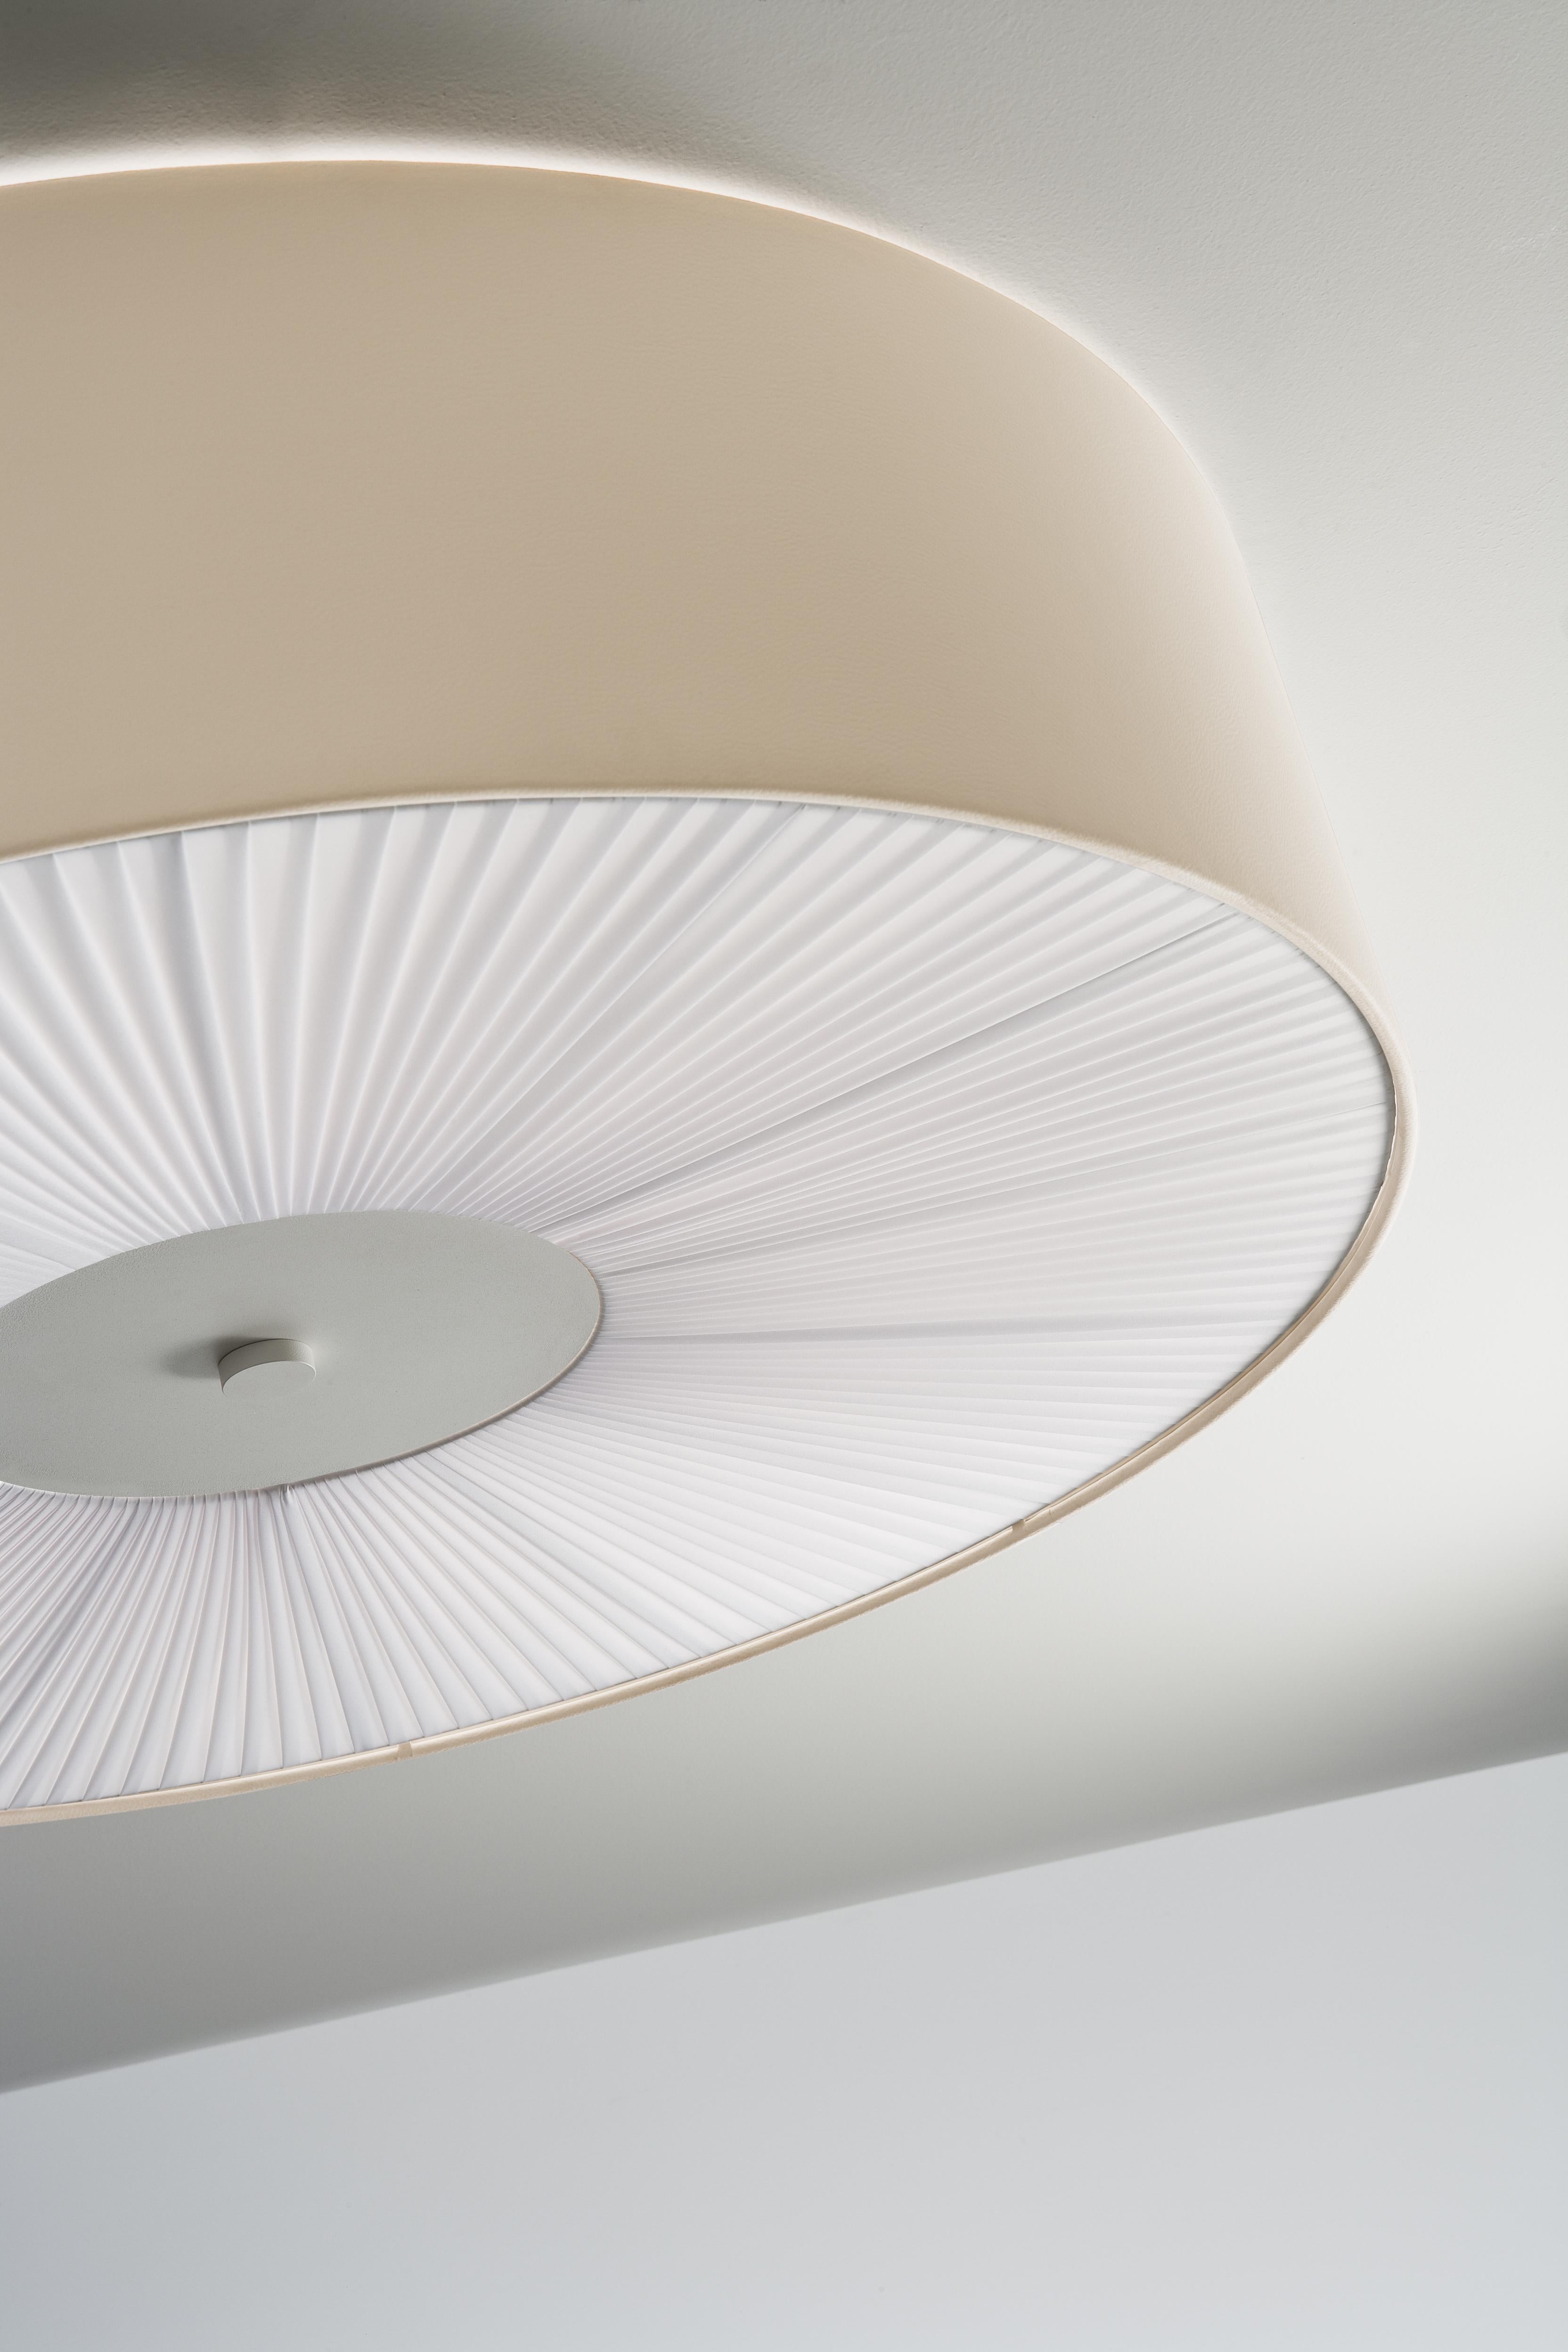 Axolight Skin Medium Flush Mount in Ivory White by Manuel Vivian

Refined rationality of perfect form. Skin reveals itself in its simplicity with multiple colors in fireproof eco-leather and different sizes, giving uniqueness and elegance to any